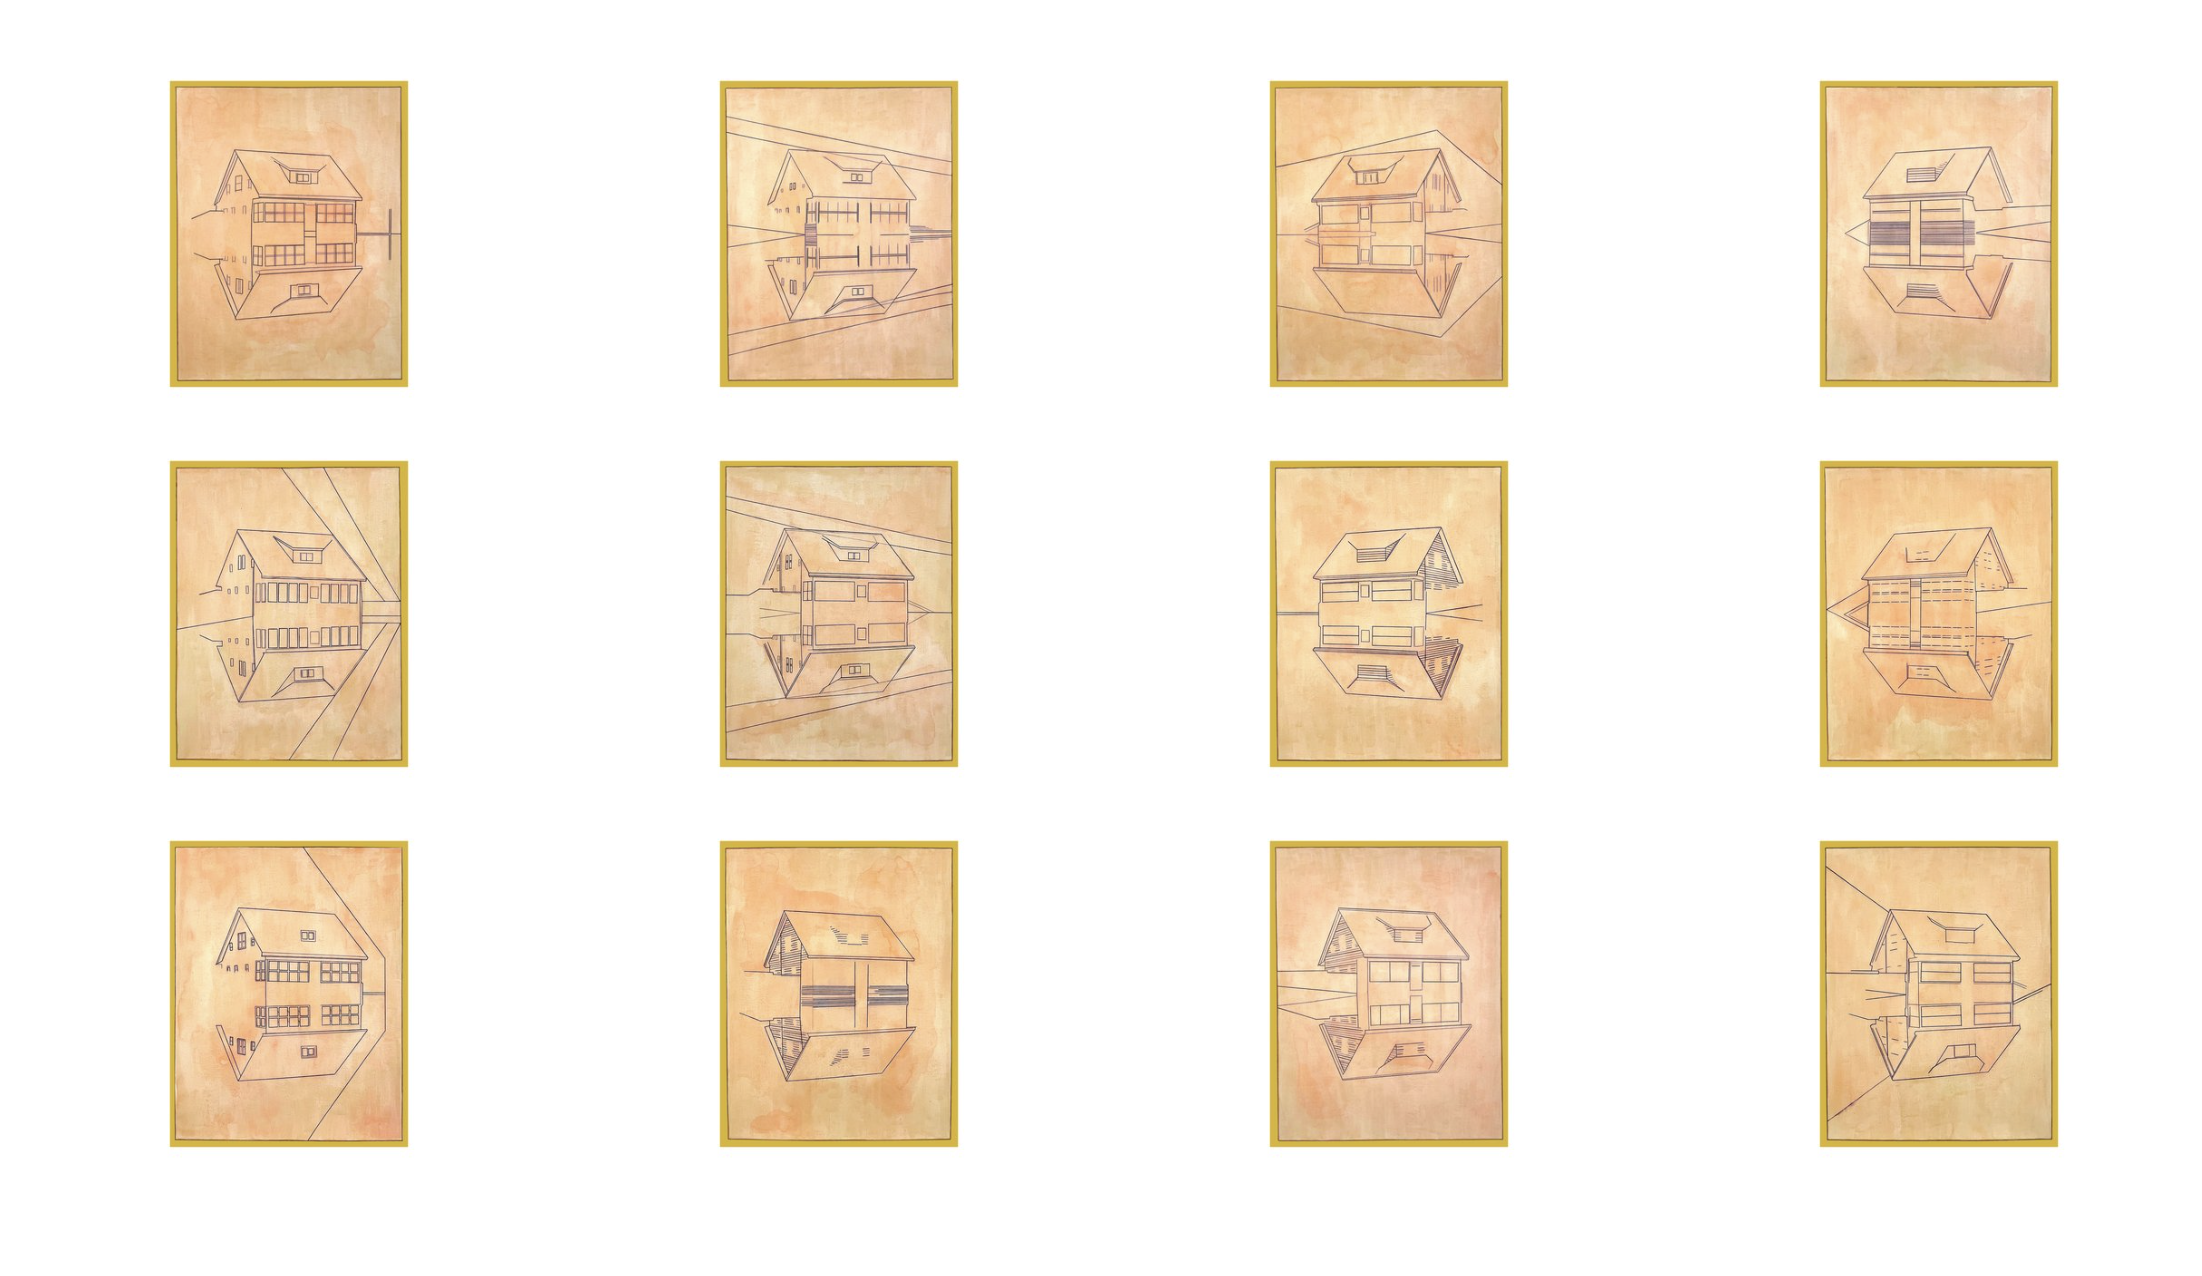 Starter Homes, 2022  Gouache, pencil, carbon transfer on gessoed paper